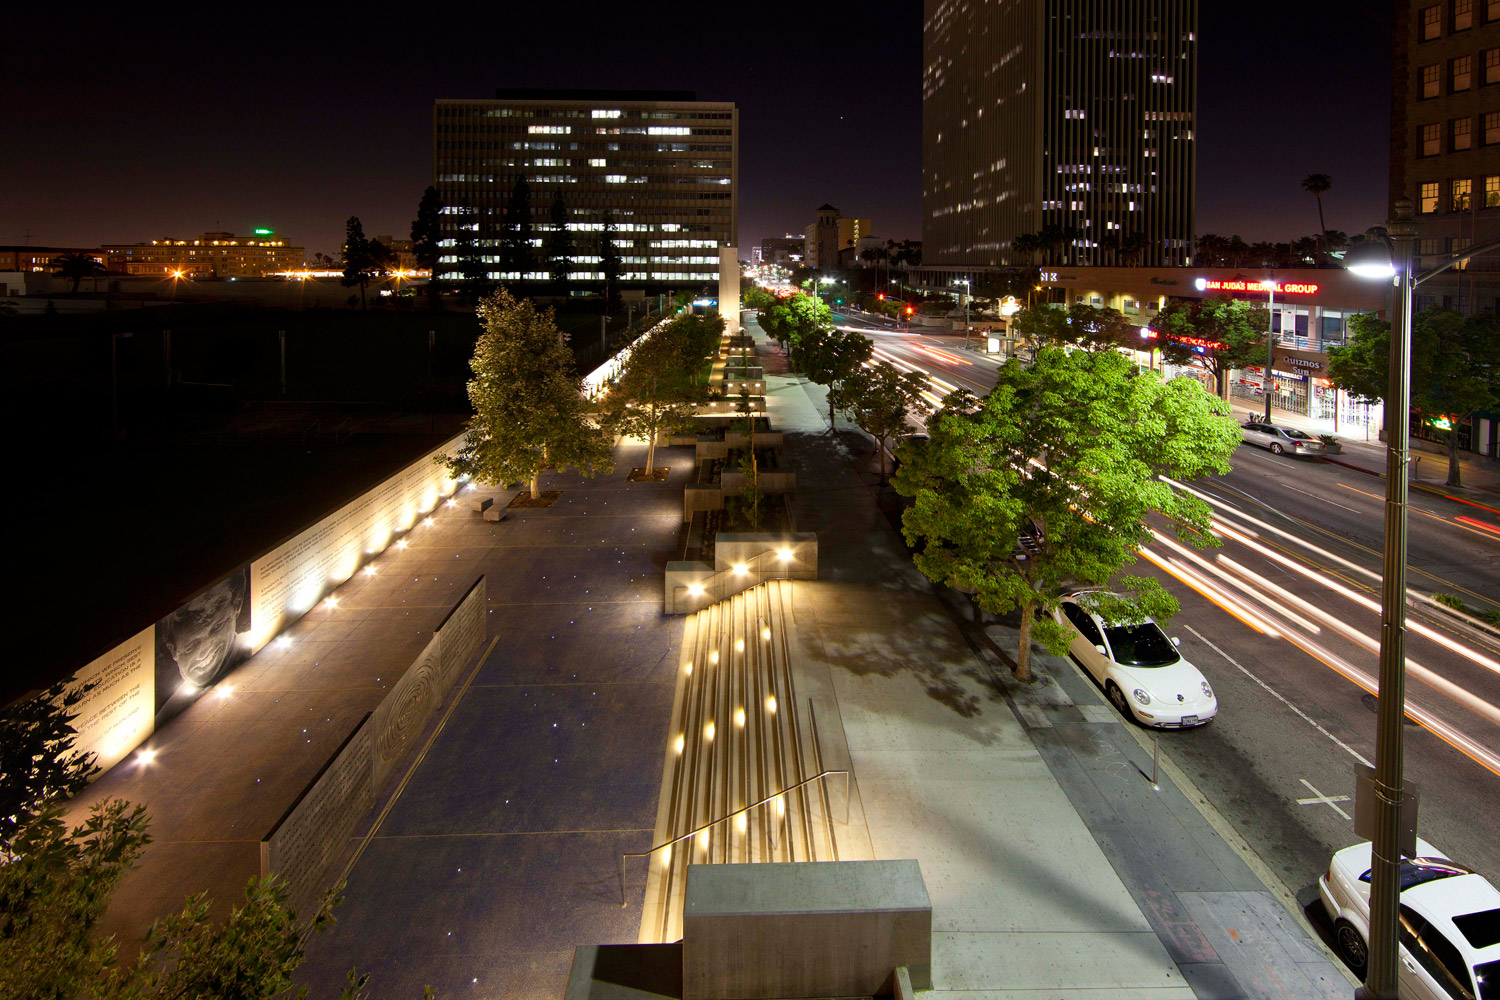   "Robert F. Kennedy Inspiration Park",&nbsp;Angle view&nbsp;    (Collaboration with artist May Sun)    2010    